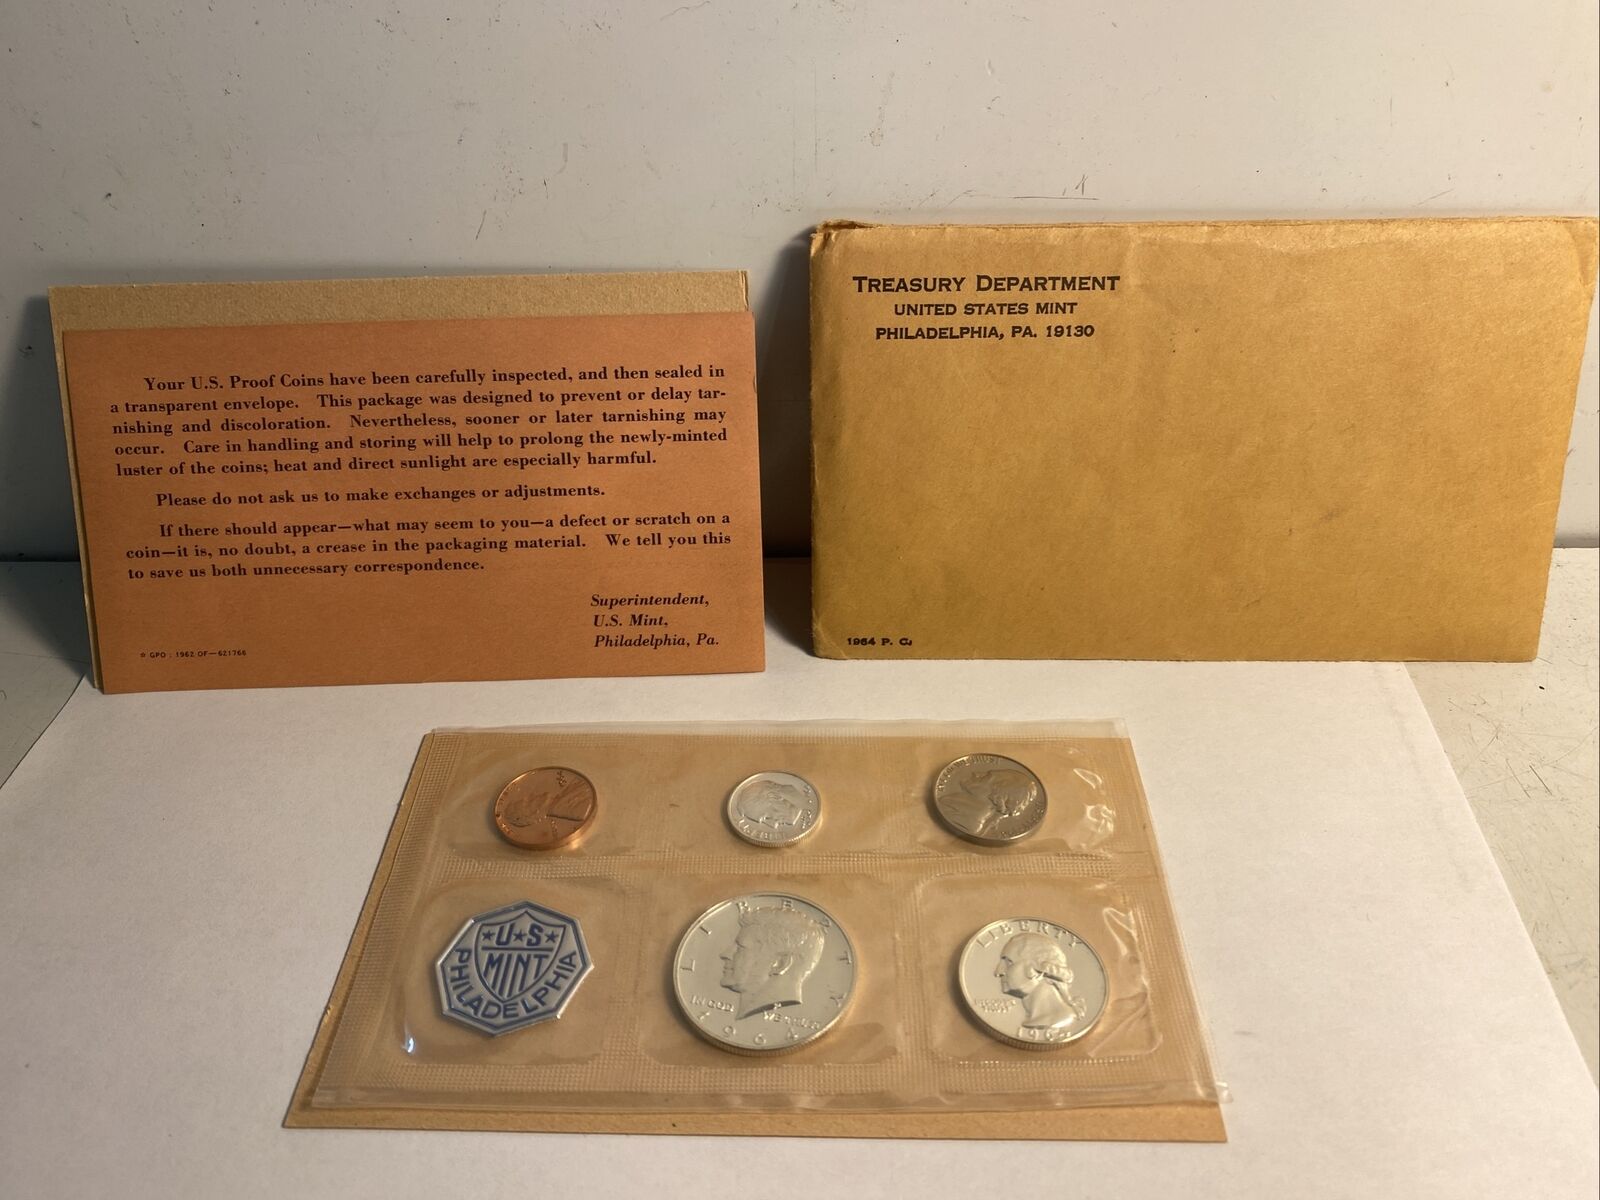 1964 United States Proof Set Silver 1964 Treasury Dpt. Envelope Uncirculated